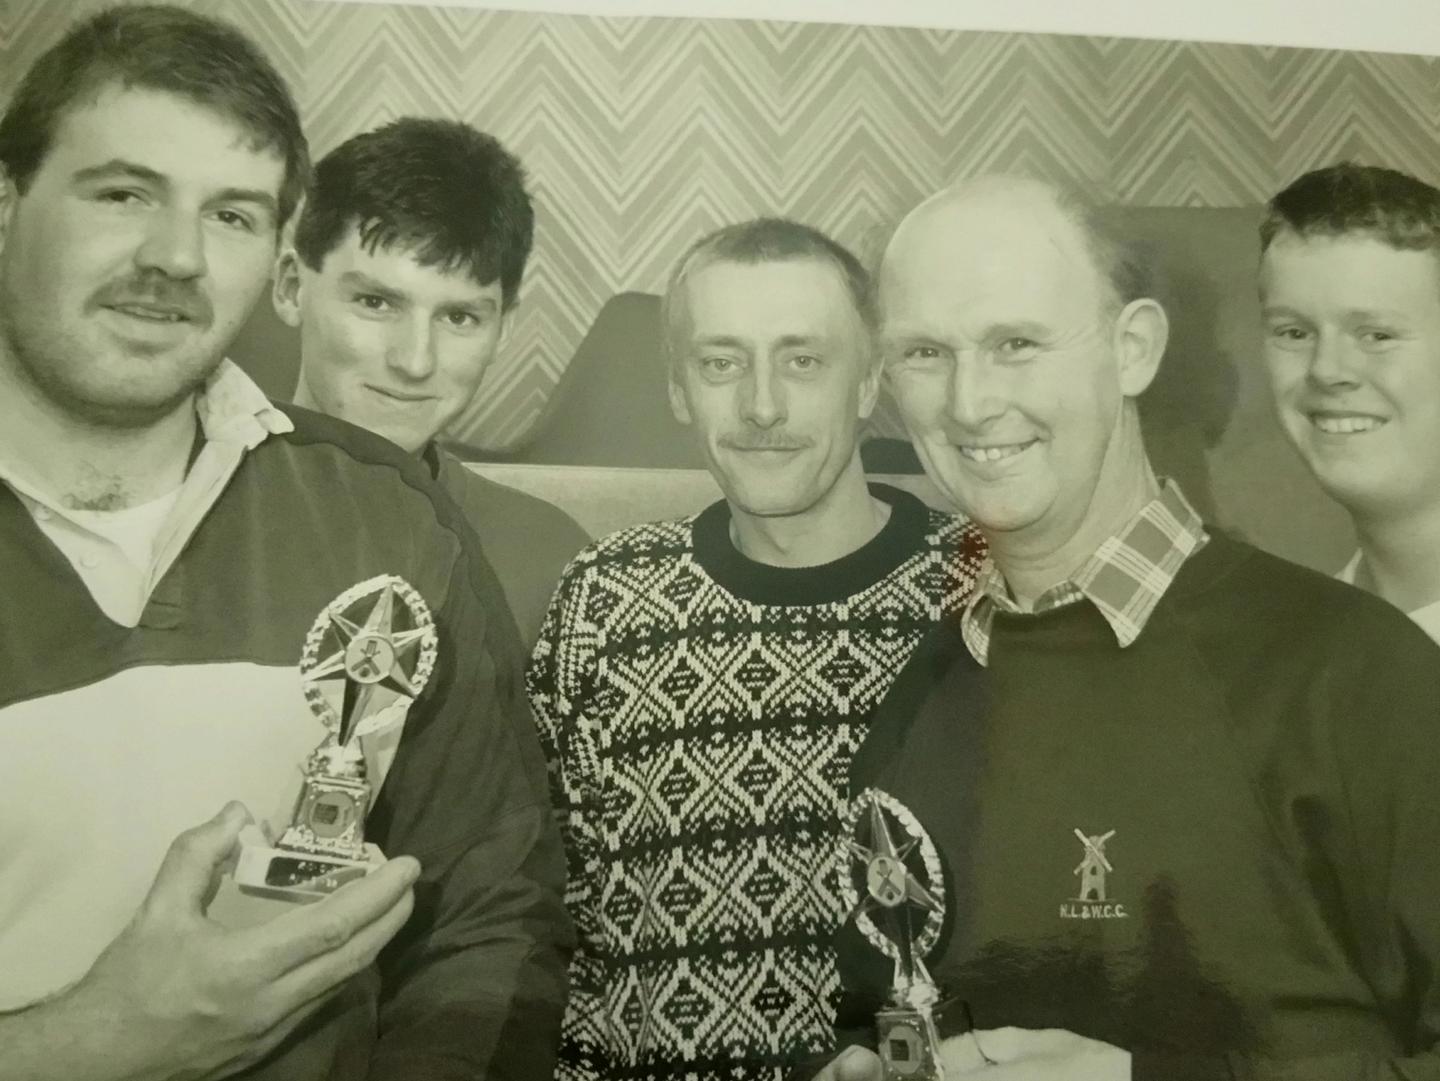 From 1992 and featuring Chris Andrews, Tony O'Reilly and a splendid jumper.